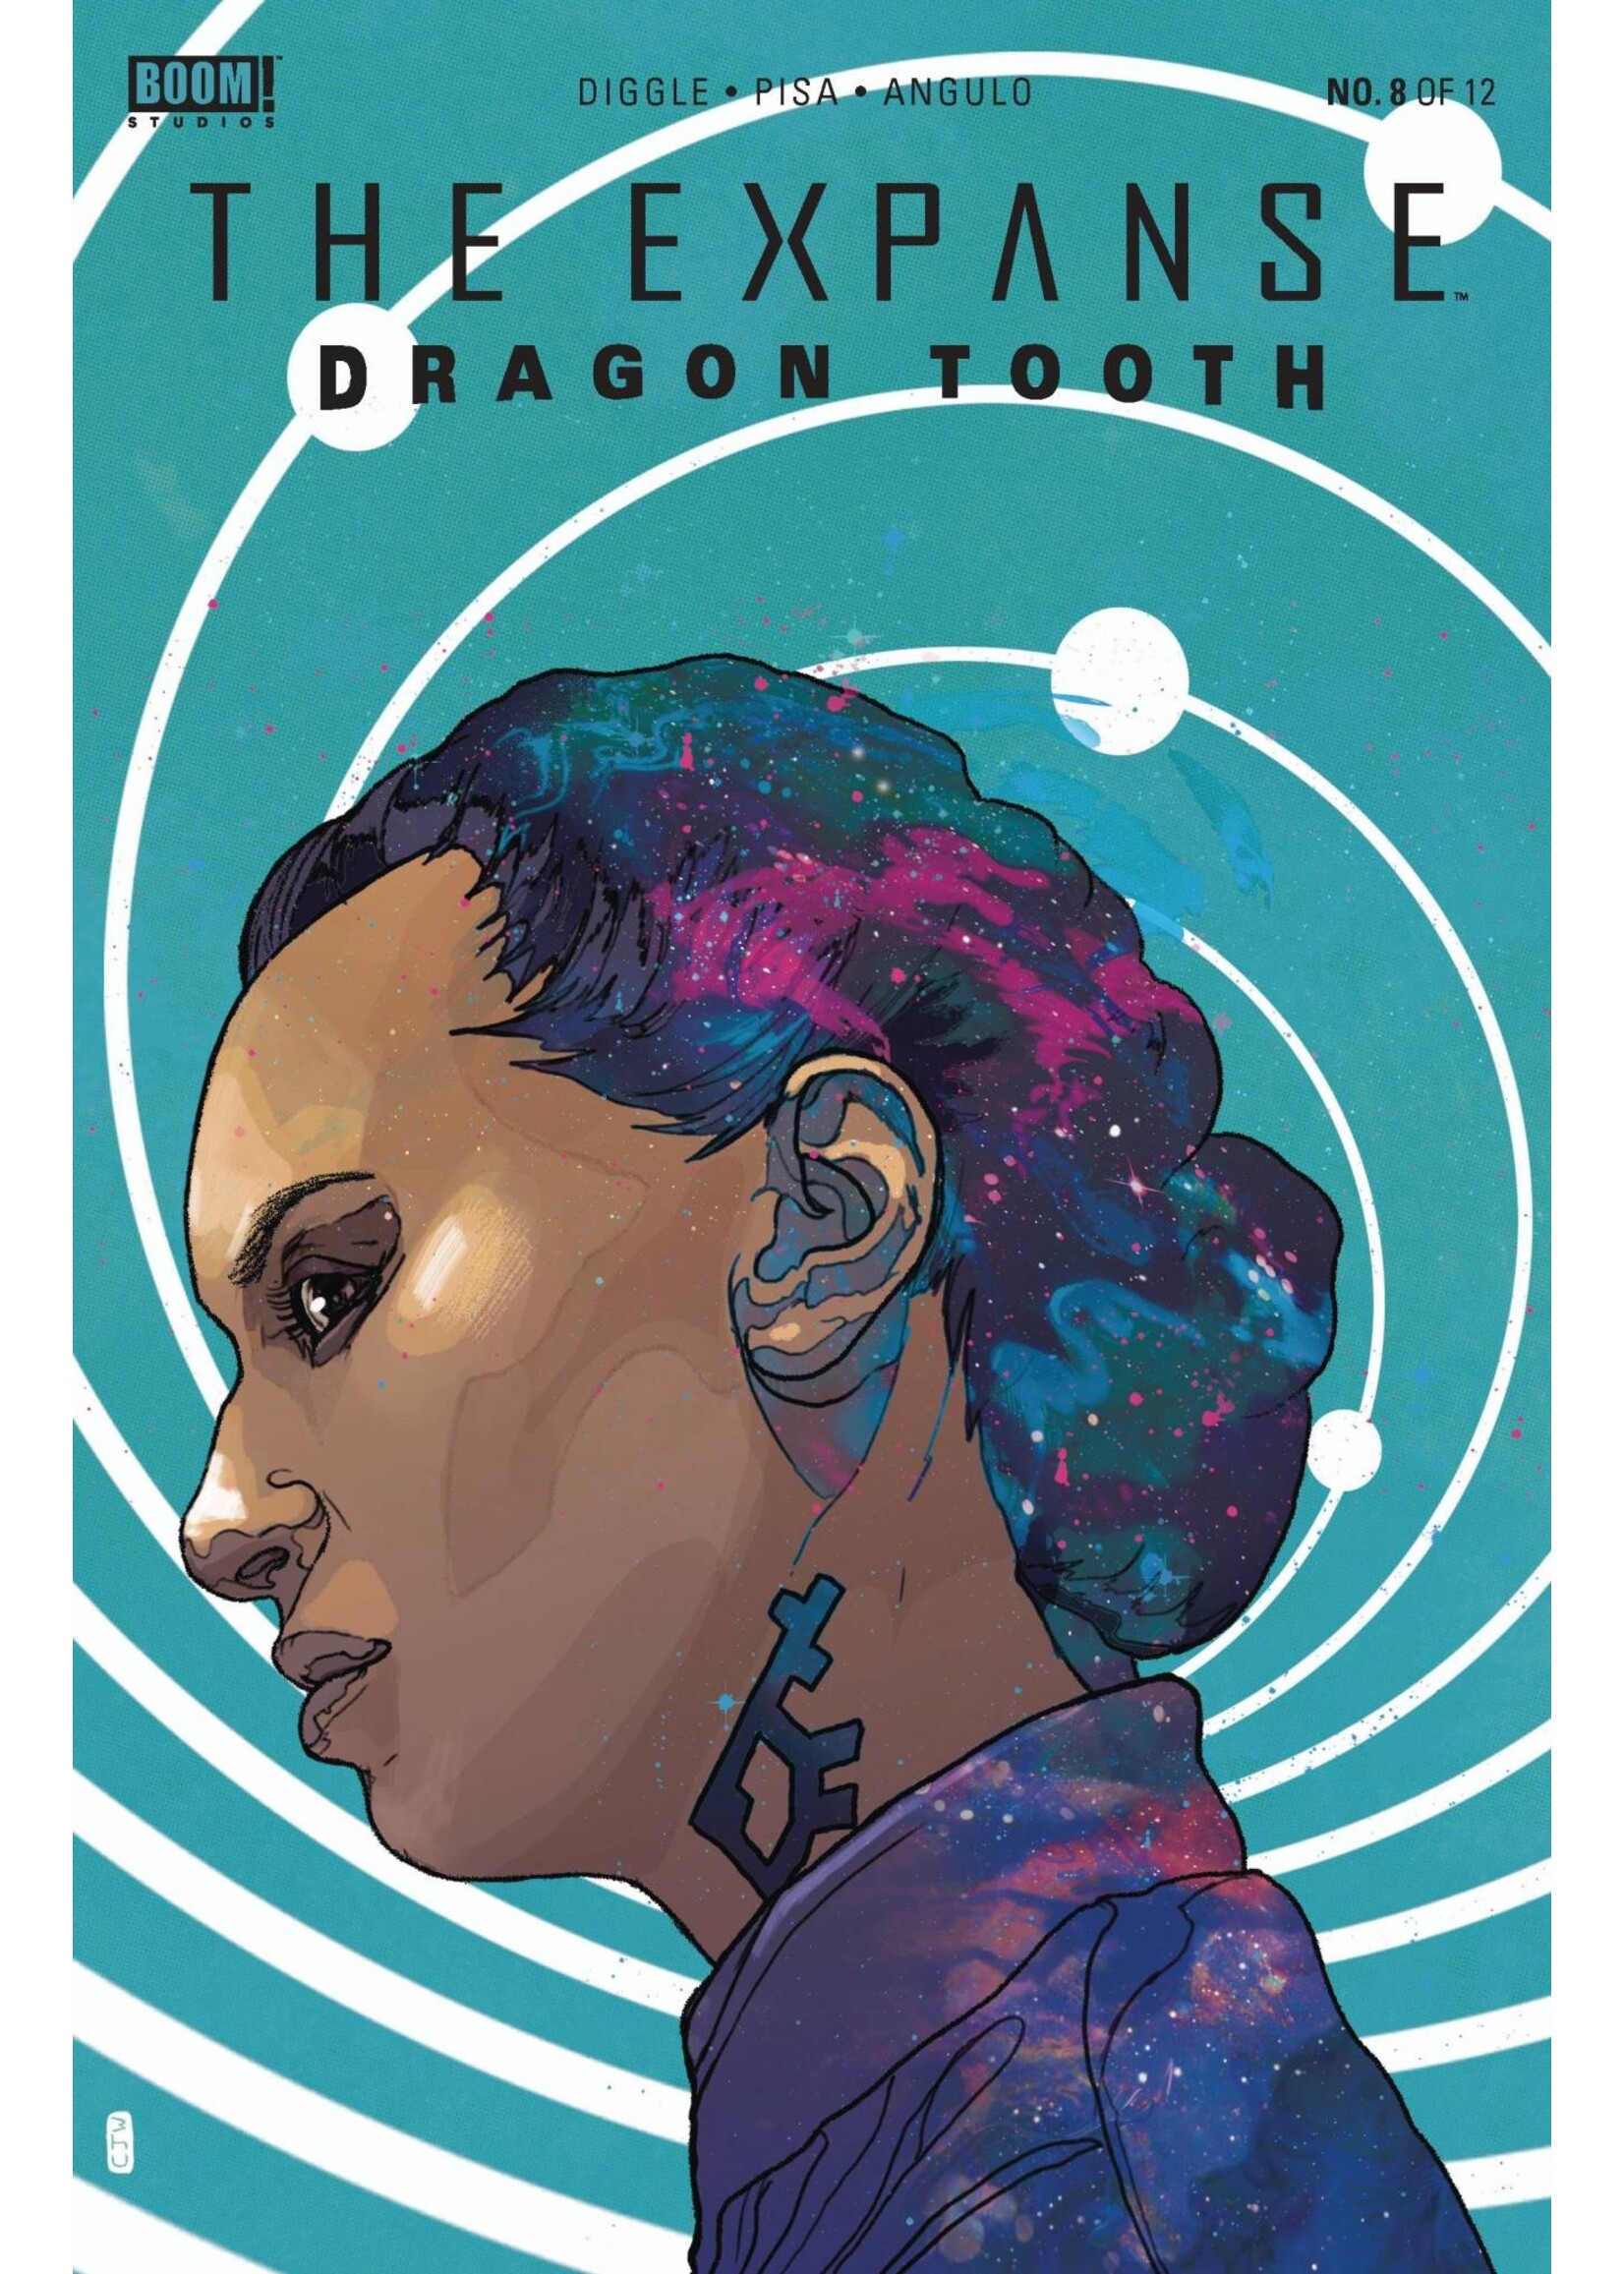 BOOM! STUDIOS EXPANSE THE DRAGON TOOTH #8 (OF 12) CVR A WARD